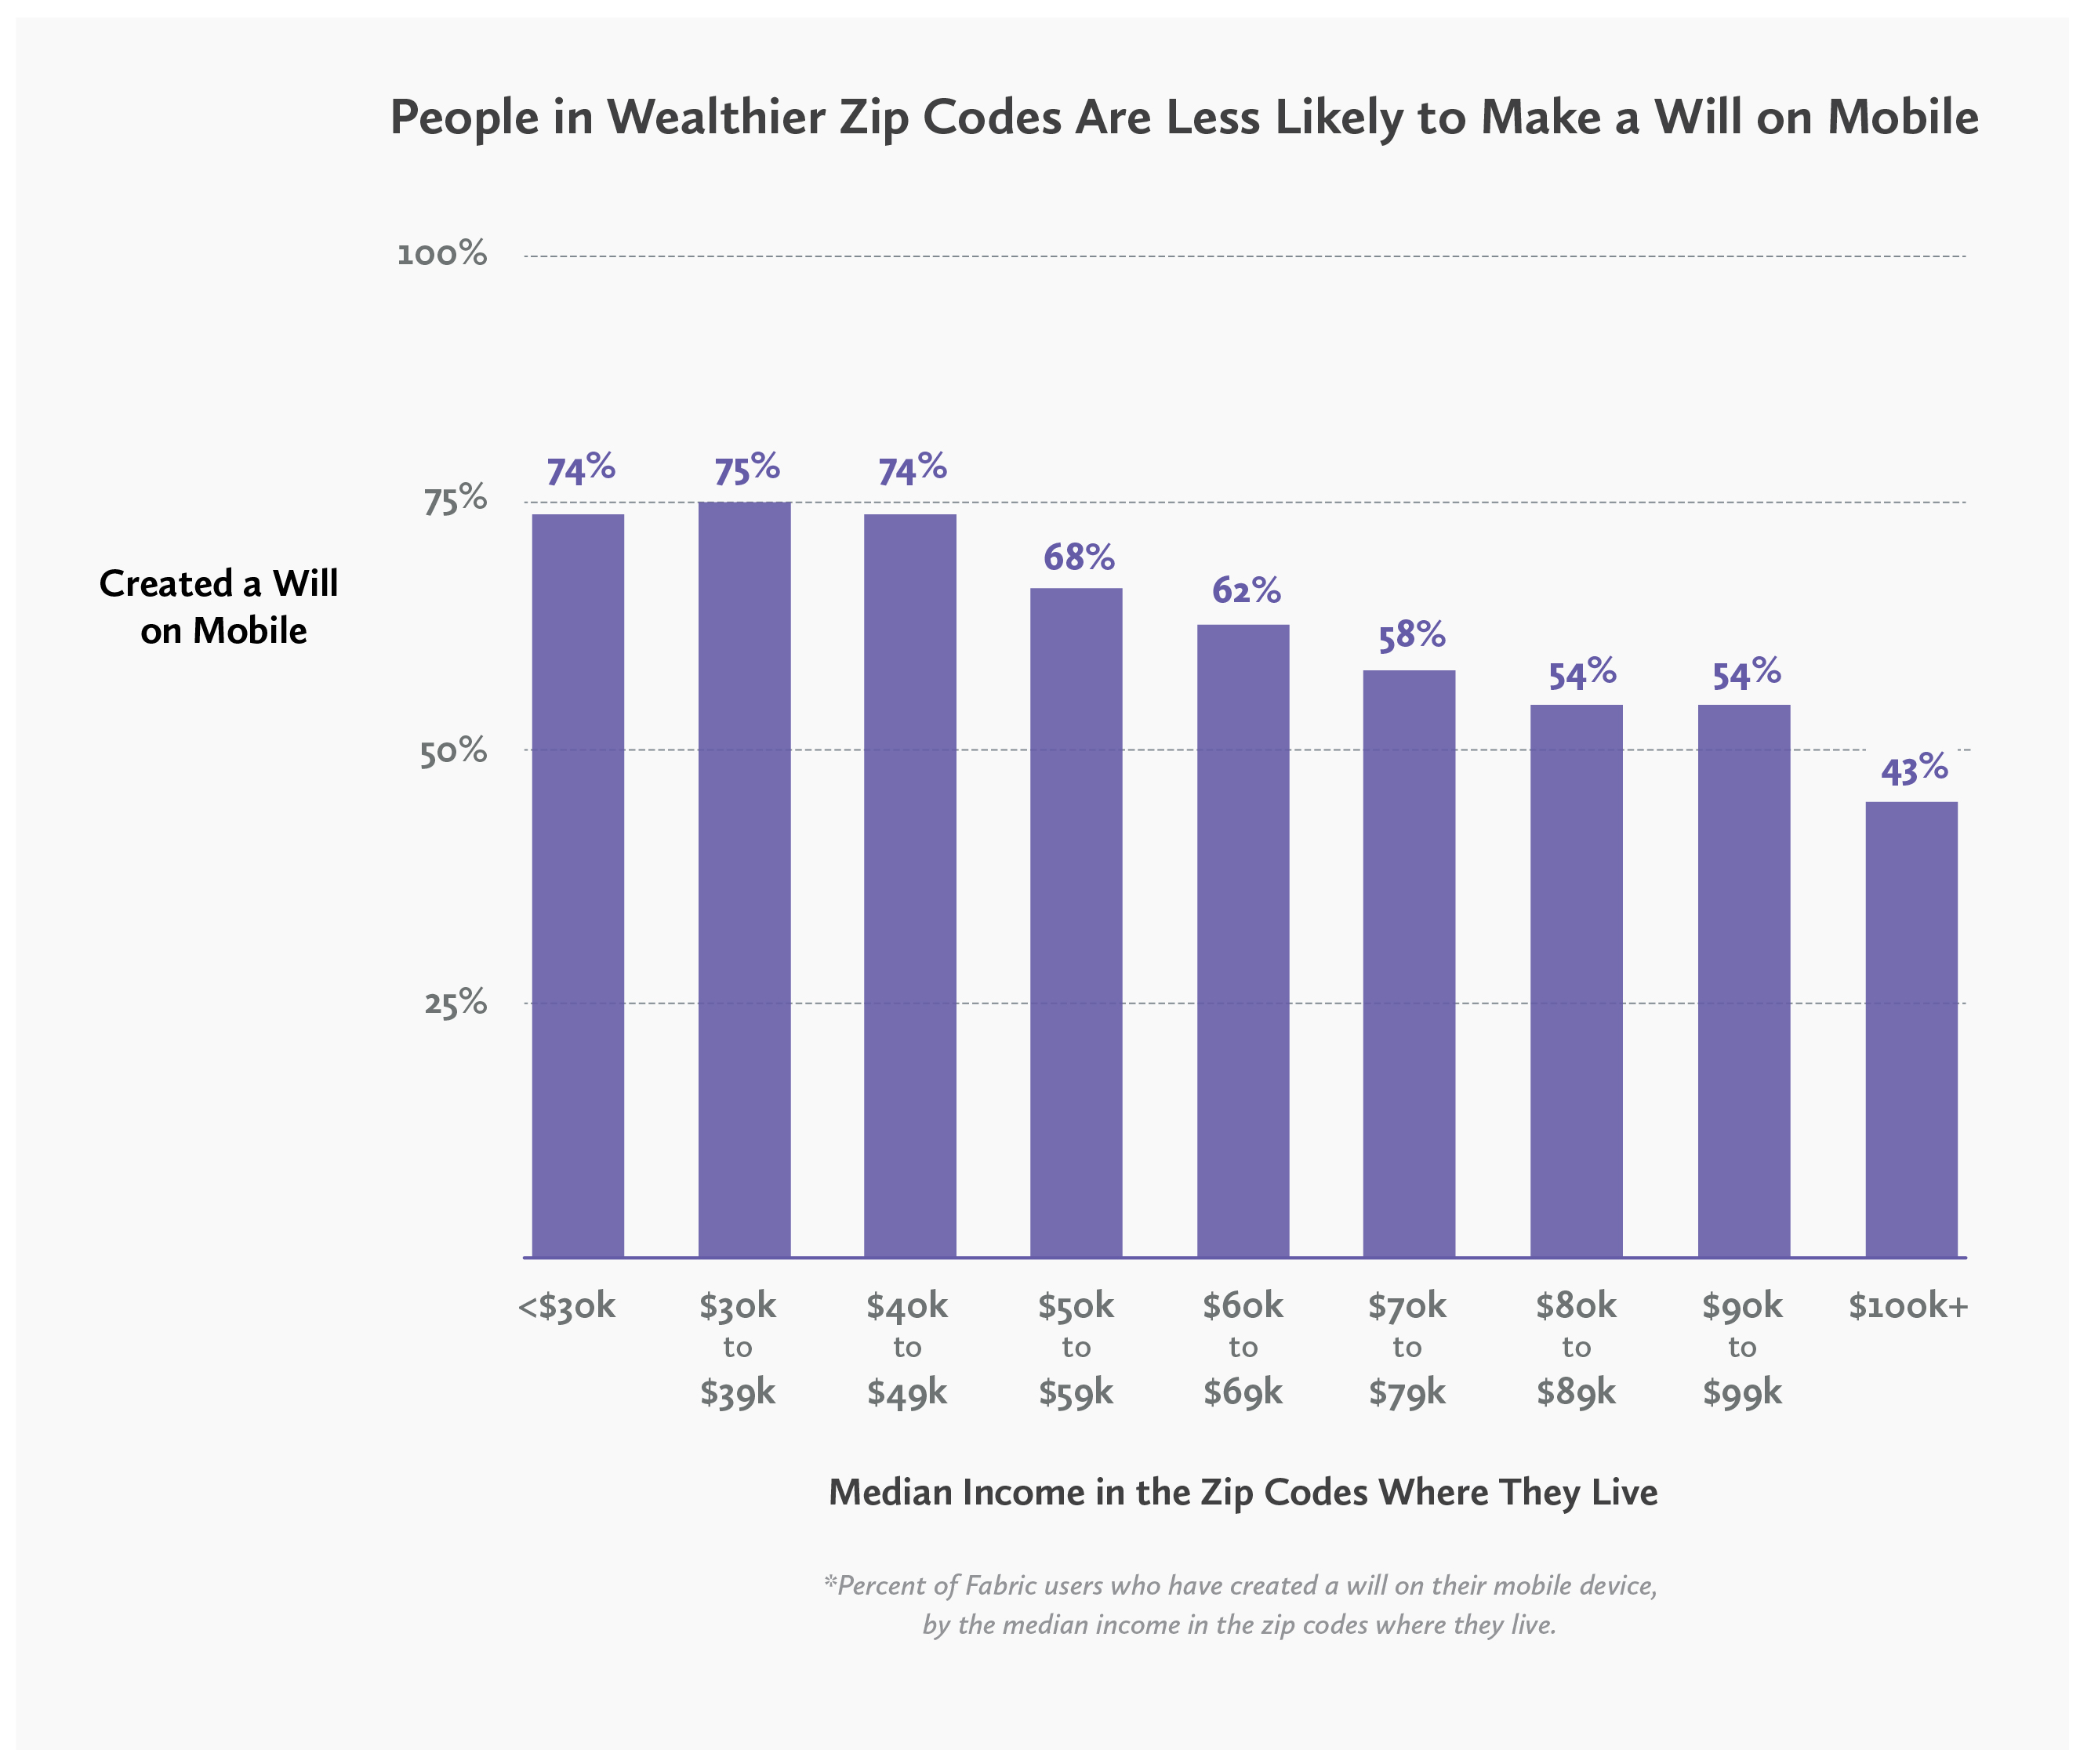 chart - people in wealthier zip codes are likelier to make their wills on a desktop computer instead of a mobile device